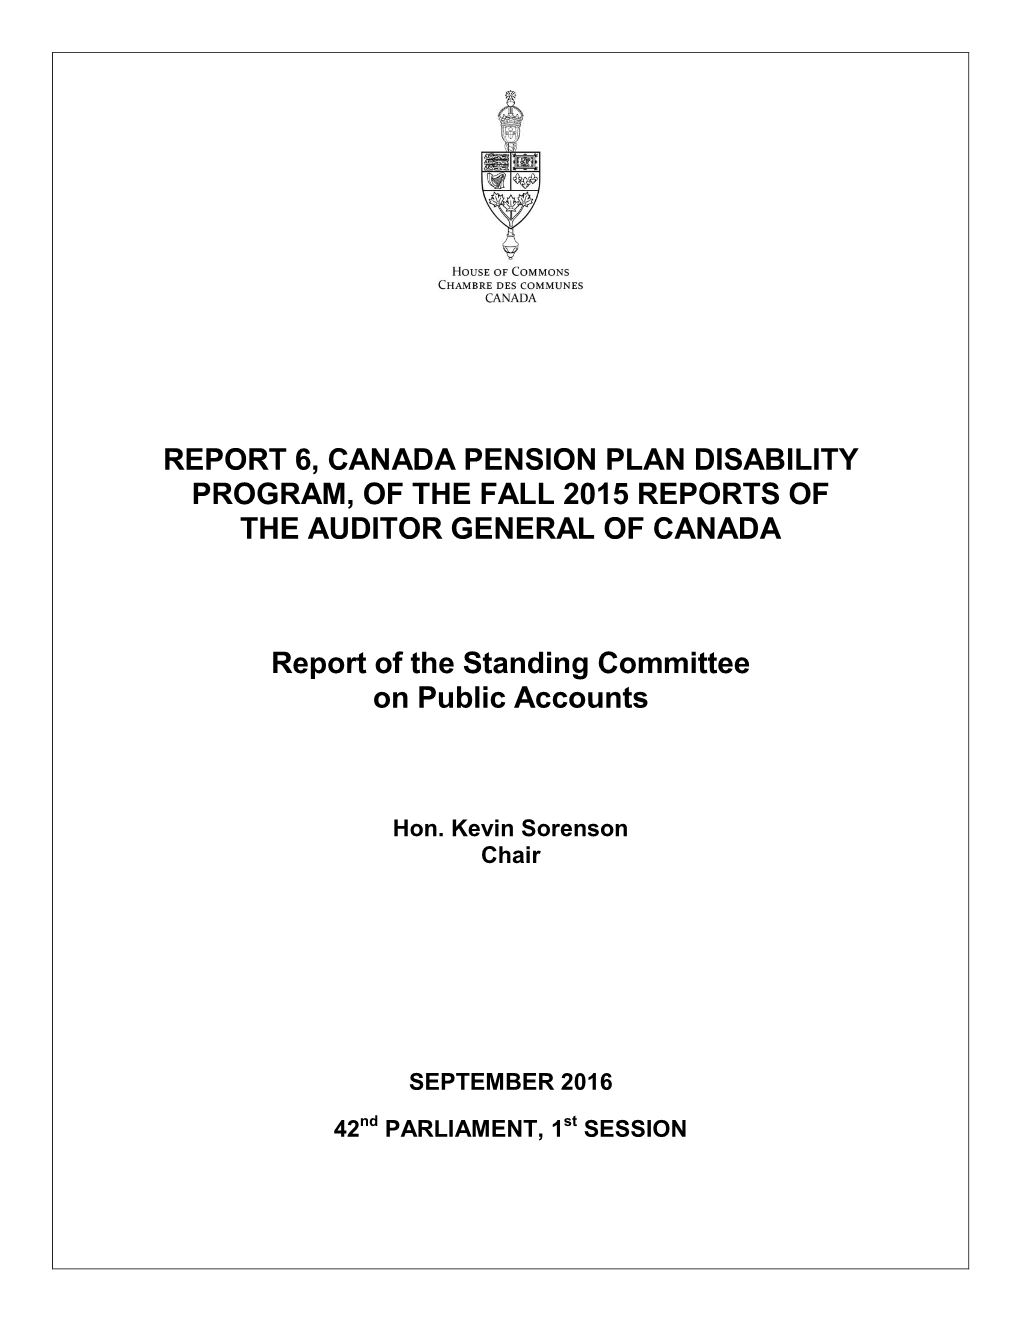 Report 6, Canada Pension Plan Disability Program, of the Fall 2015 Reports of the Auditor General of Canada